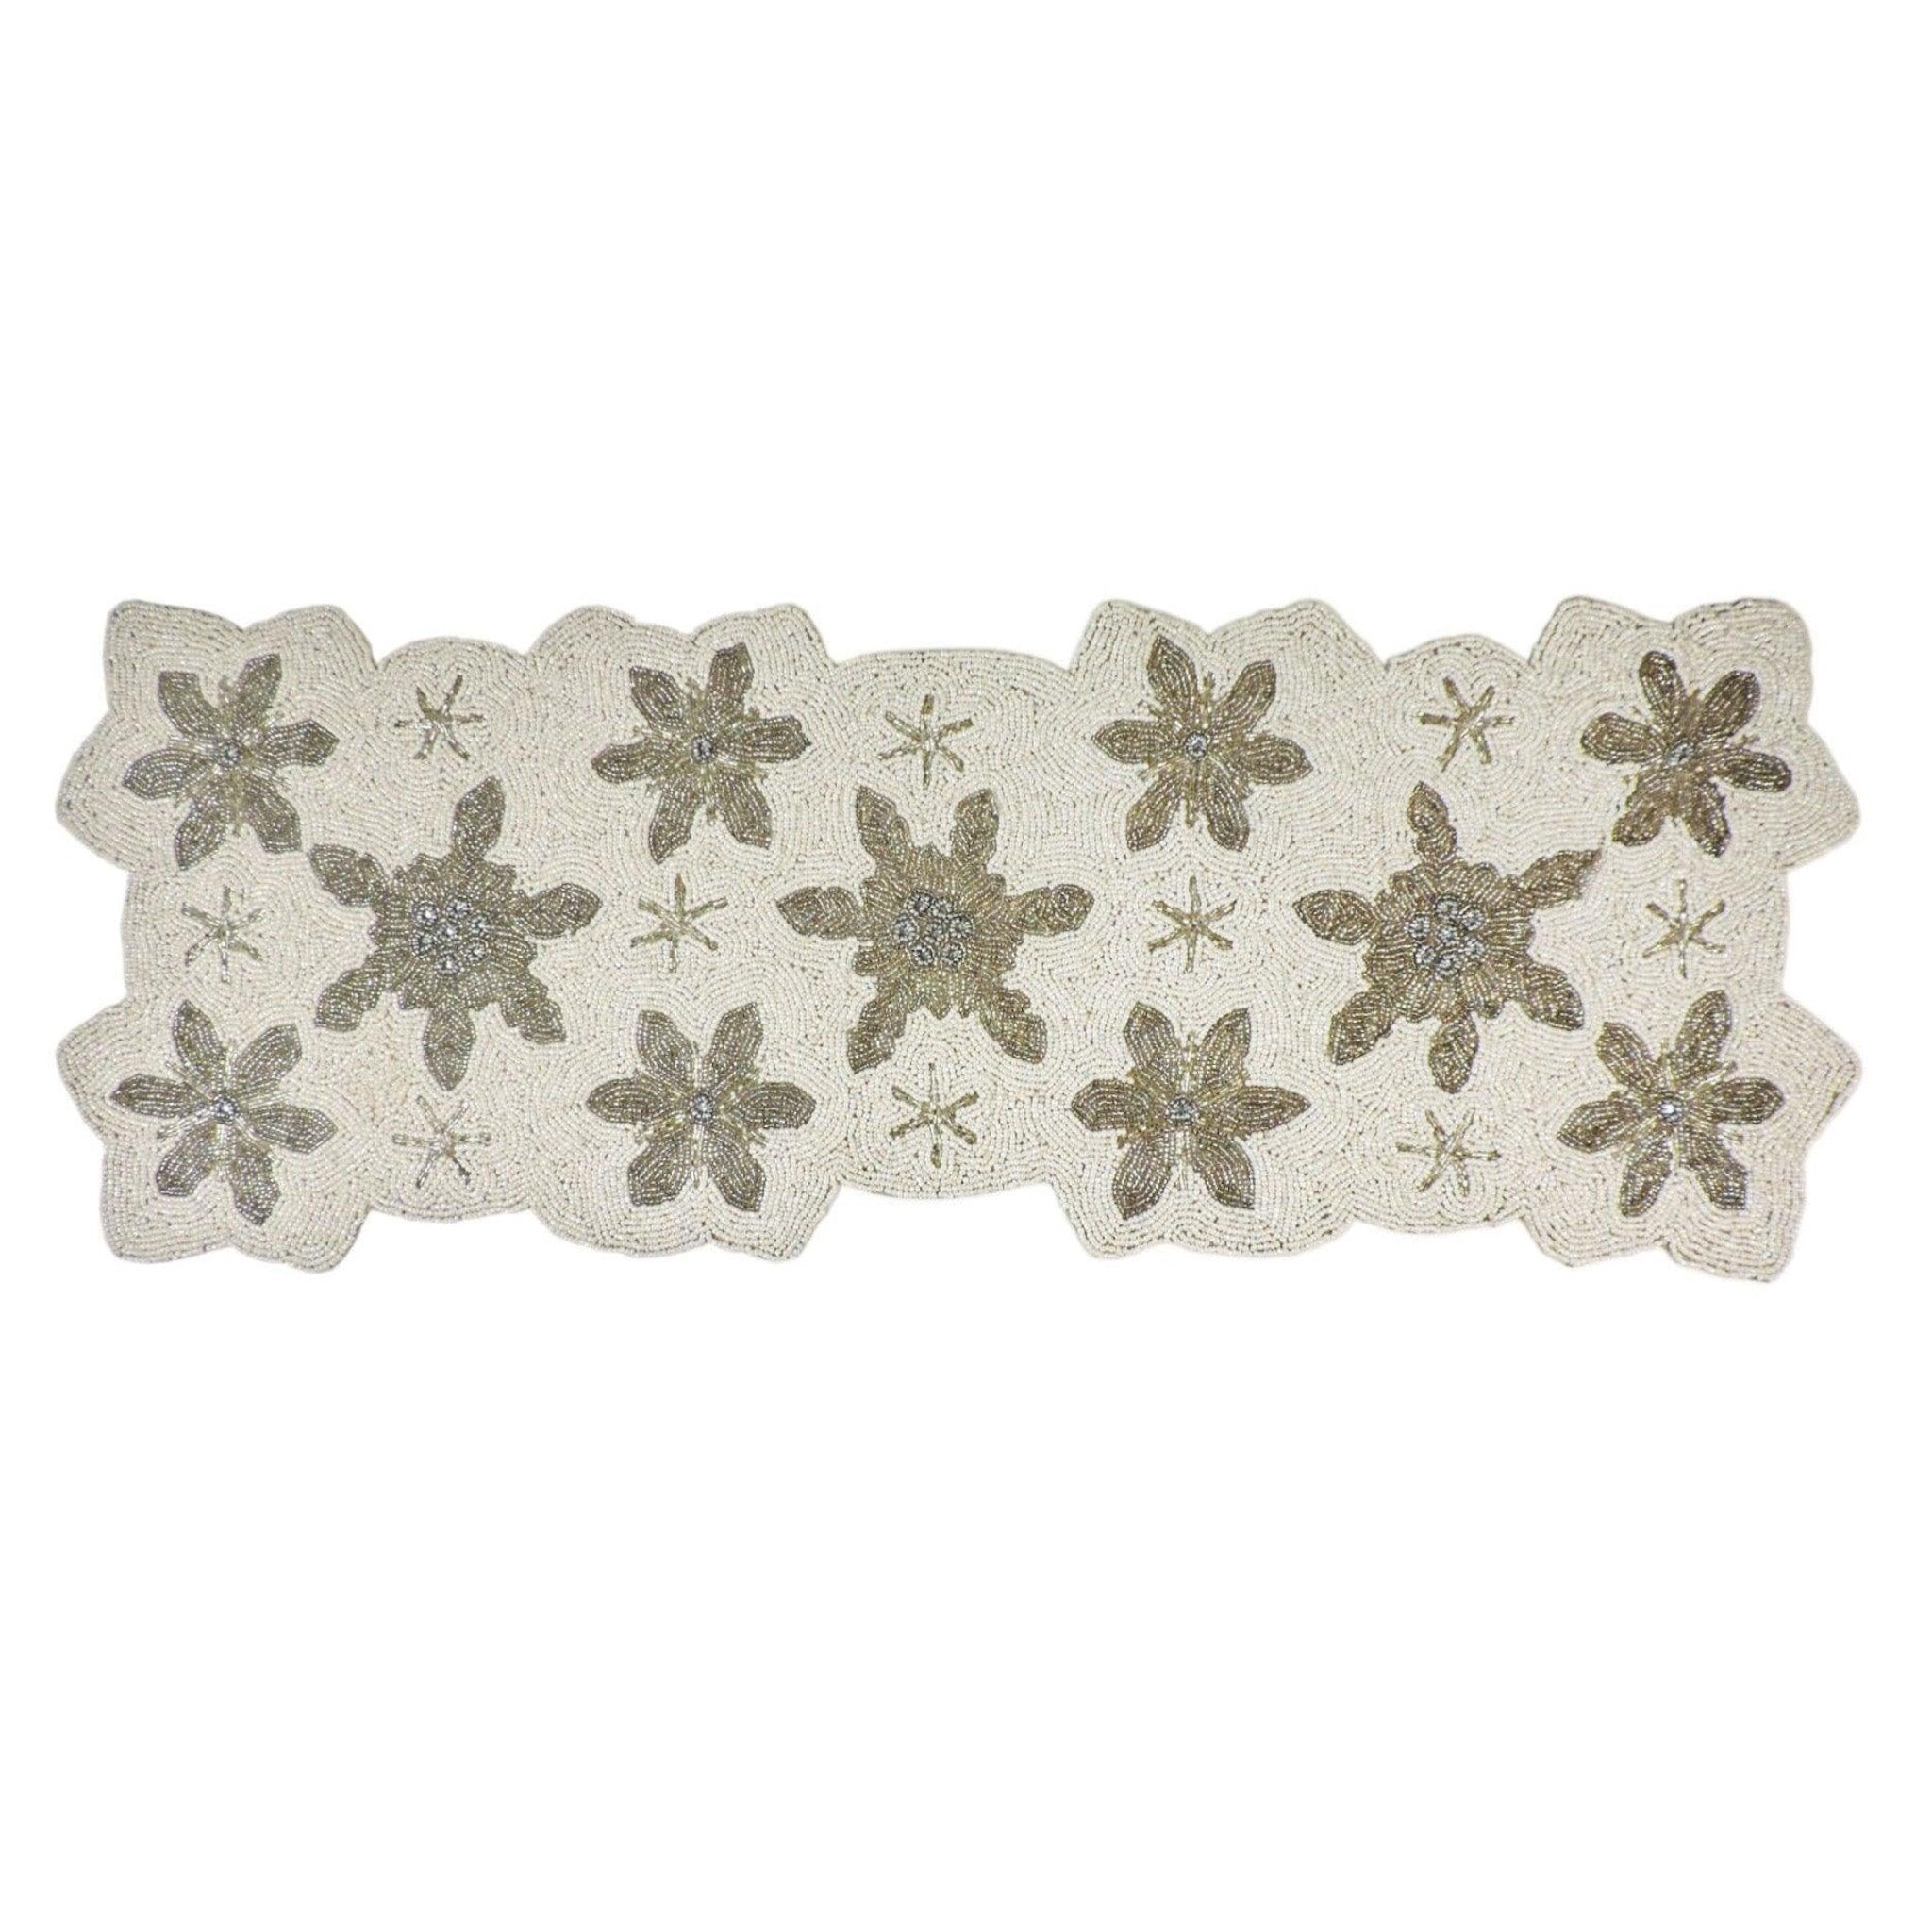 Let it Snow Bead Embroidered Table Runner in White & Silver